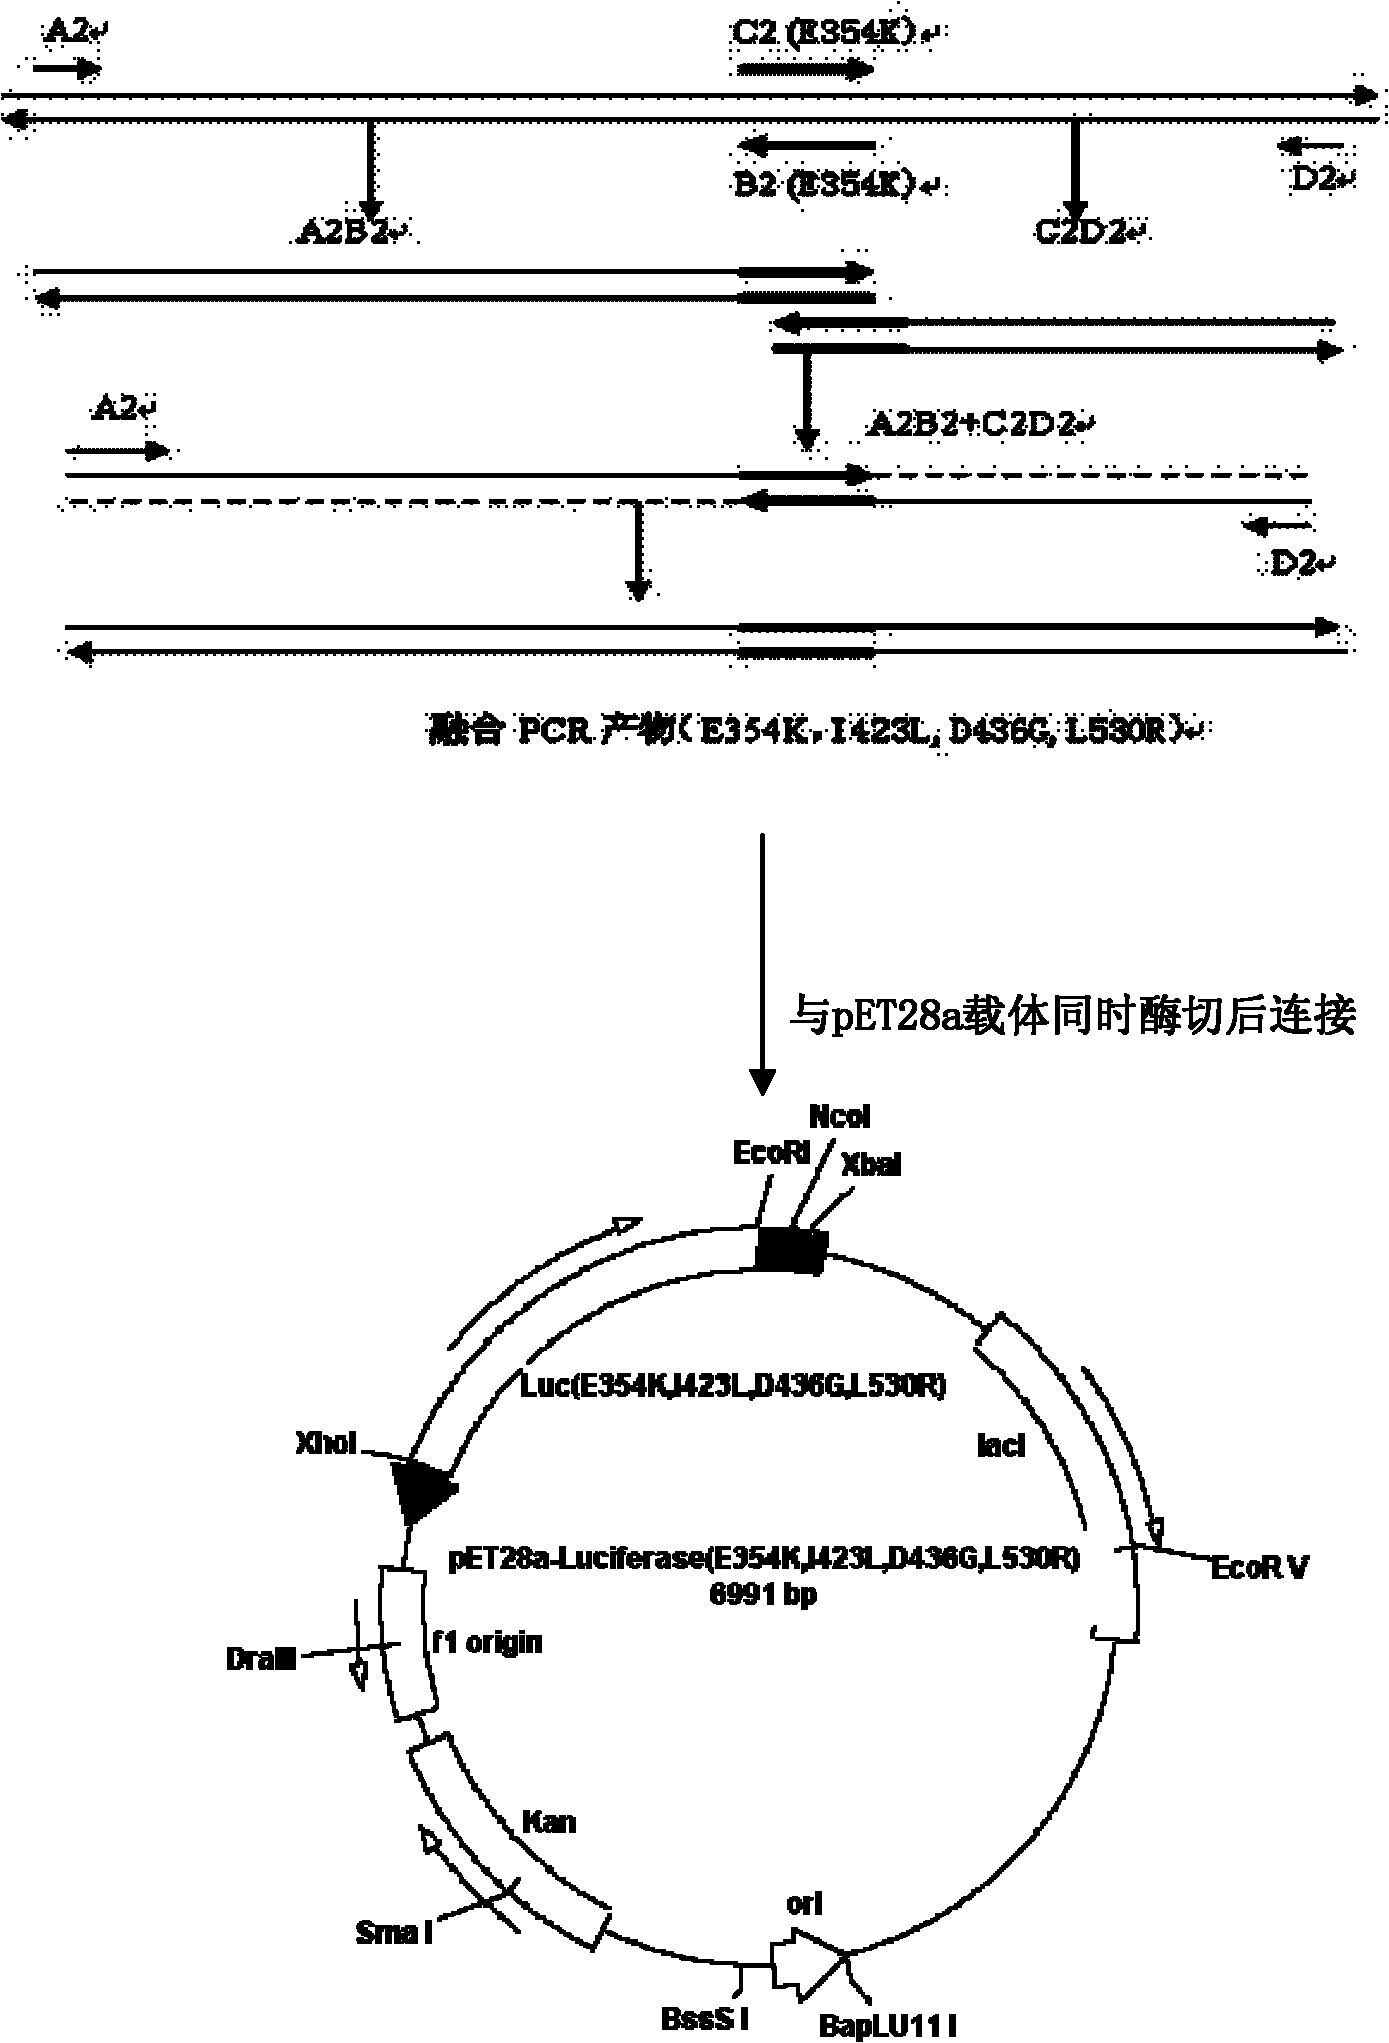 Gene encoding of firefly luciferase, its preparation method and application